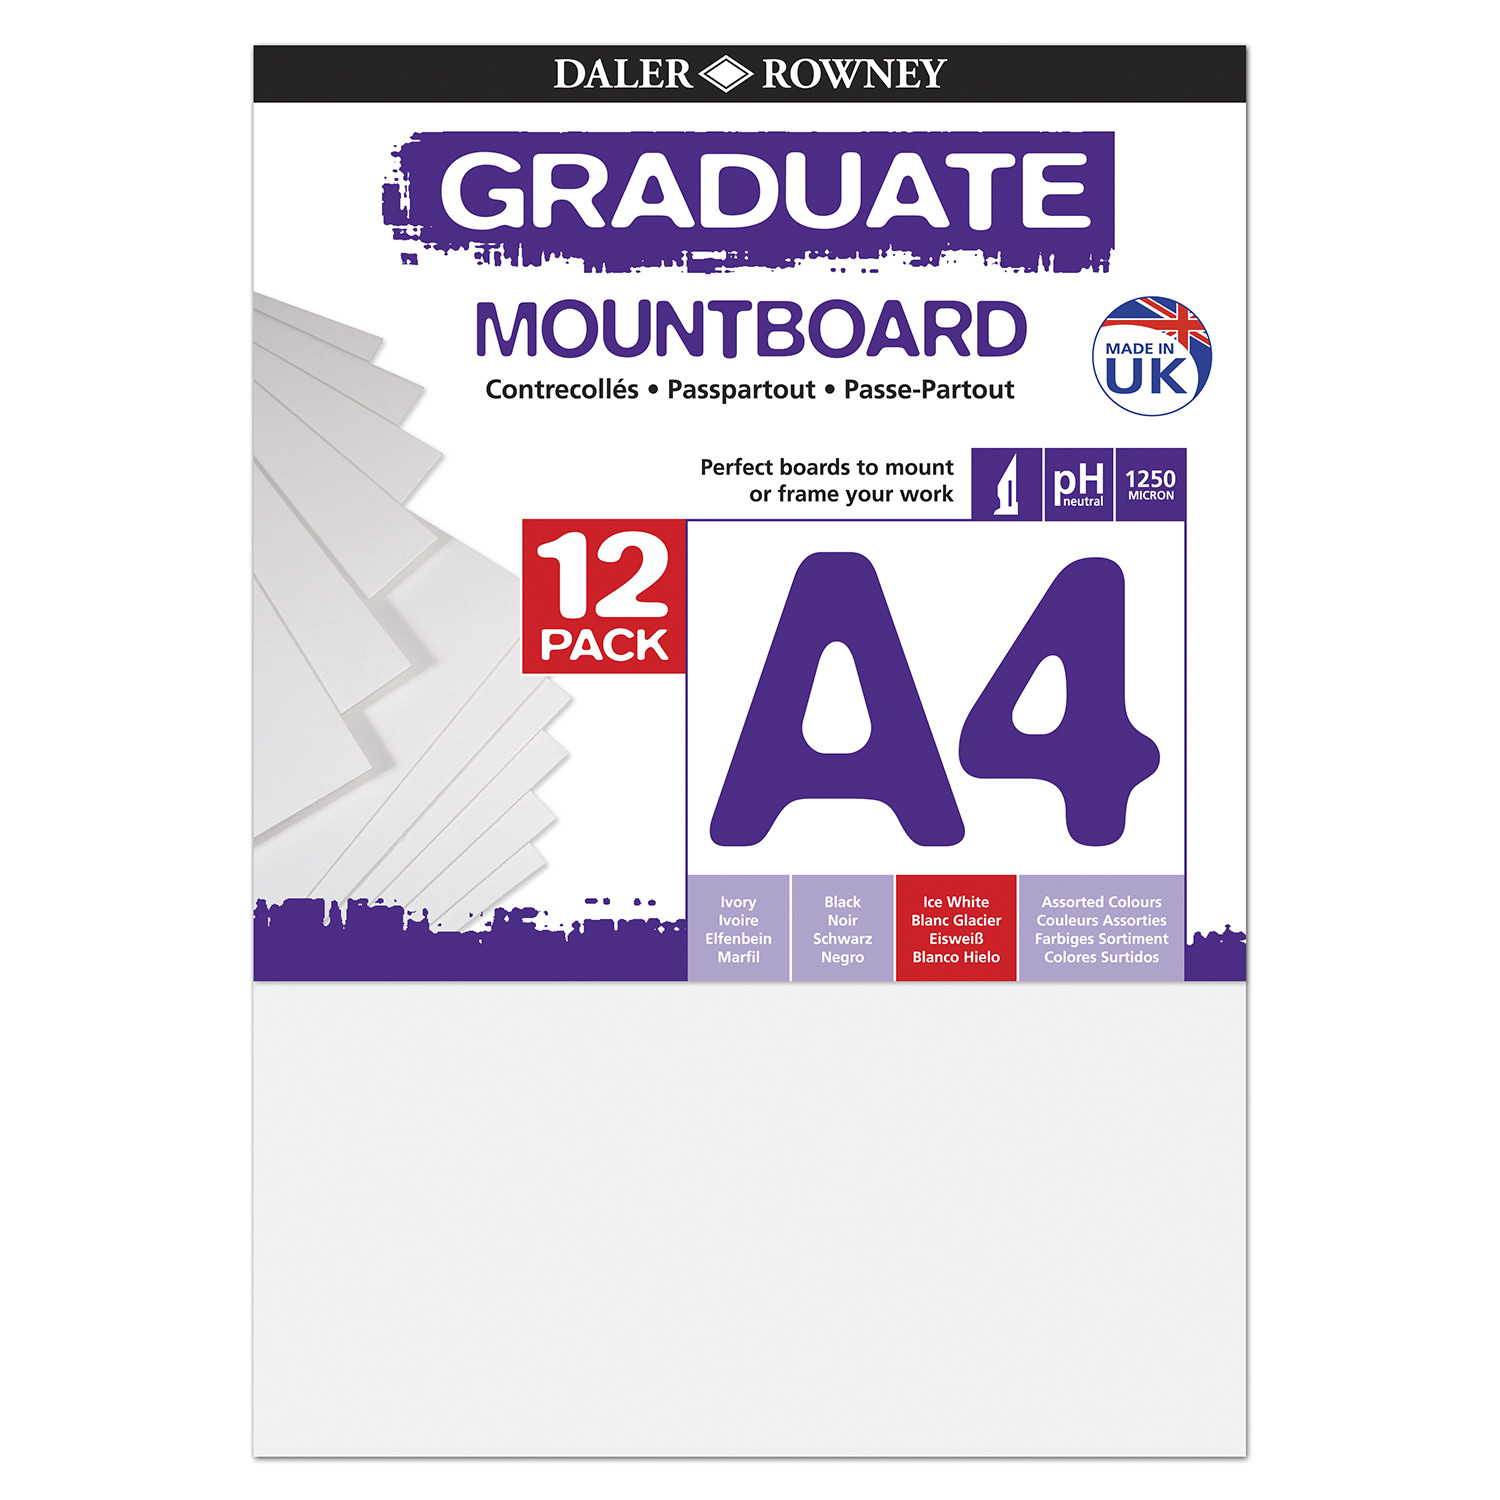 Daler-Rowney Graduate Ice White Mountboard A4 12 Pack Image